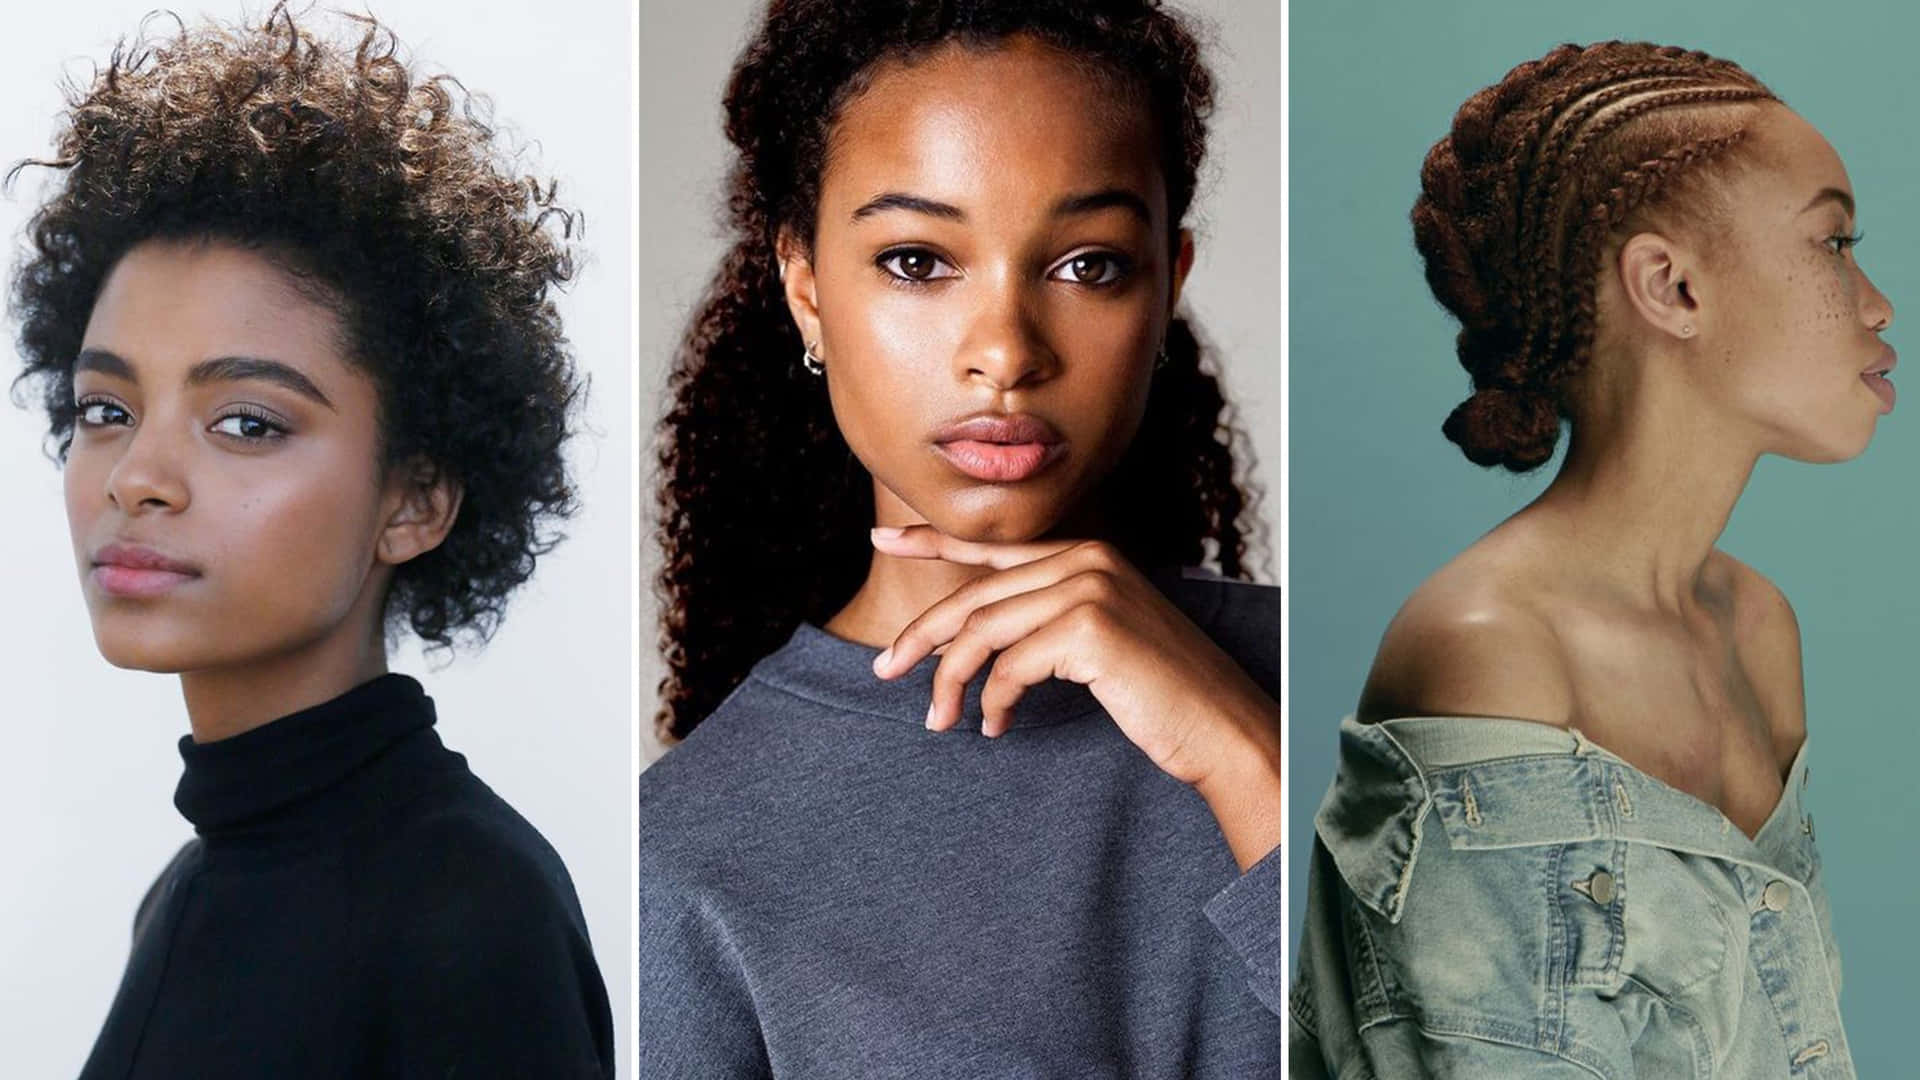 A Collage Of Women With Different Hair Styles